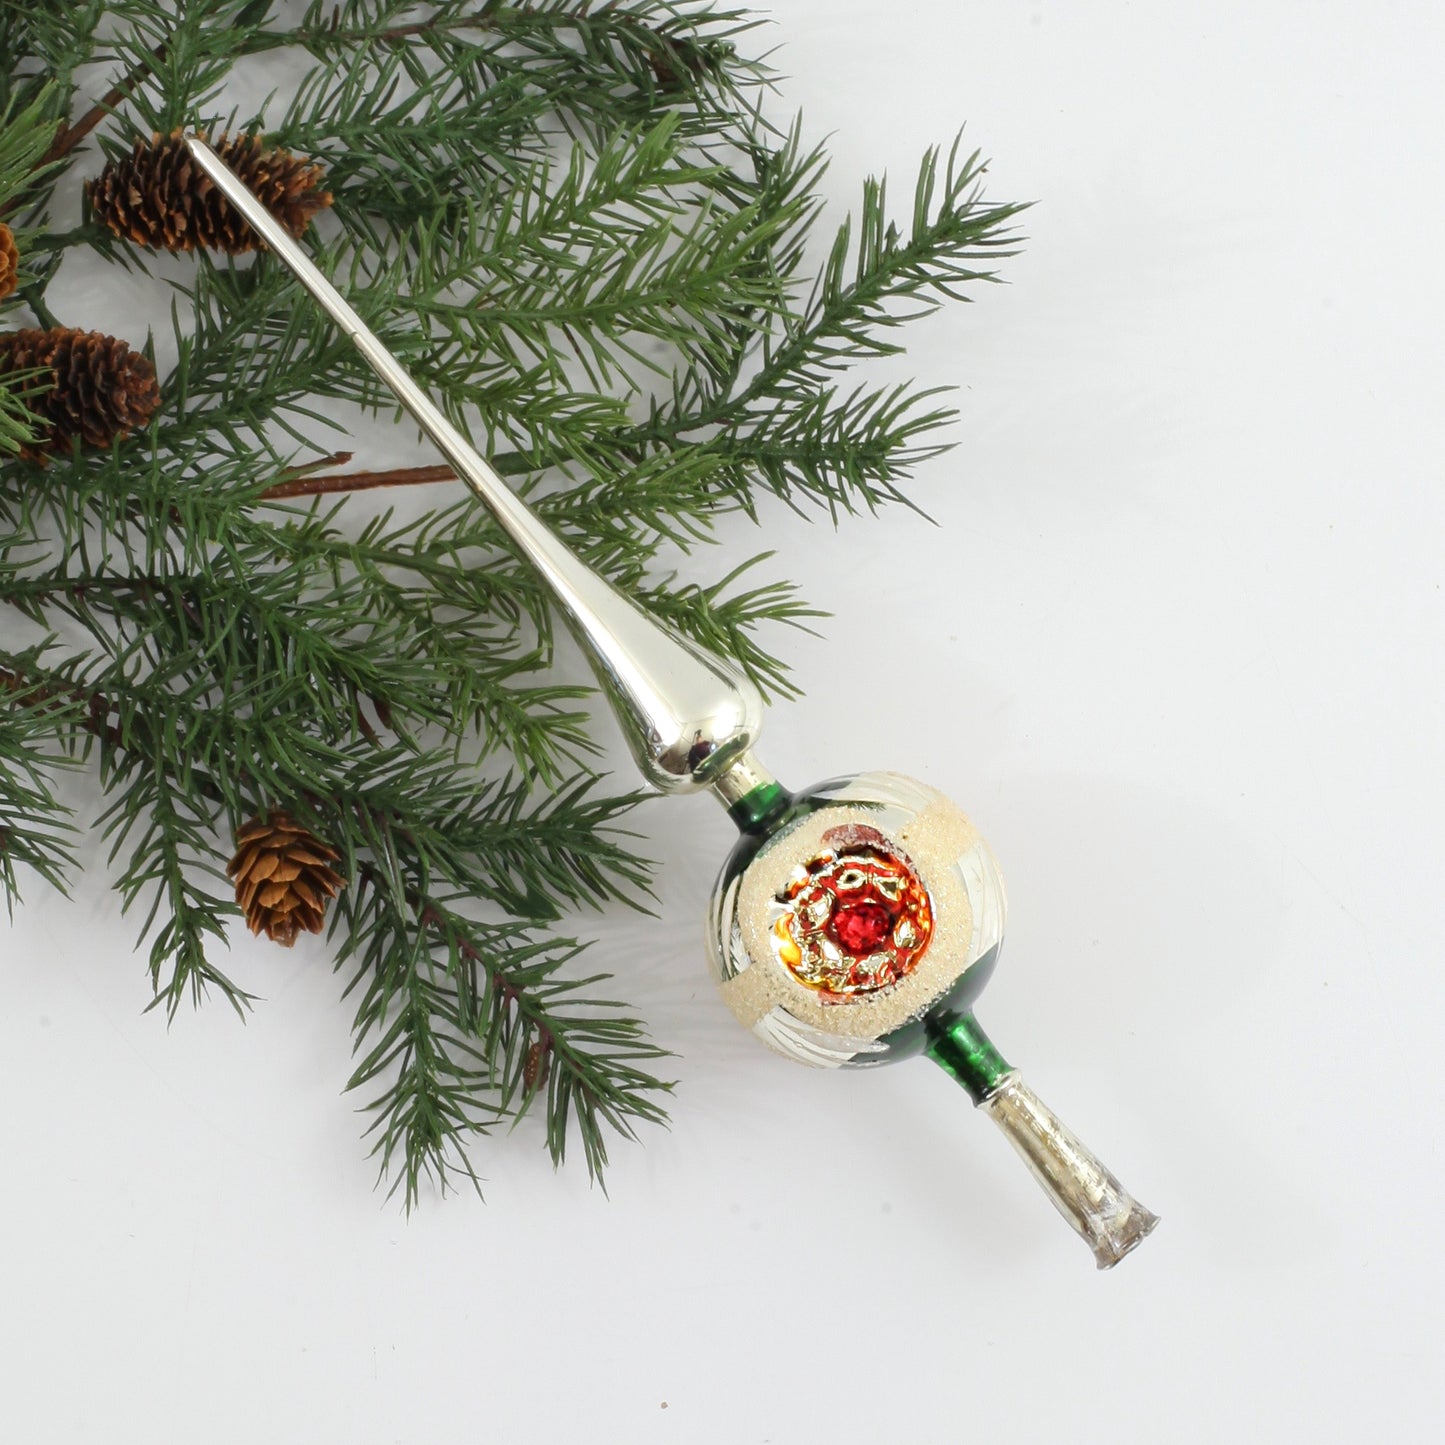 SOLD - Mid Century Modern Mercury Glass Triple Indent Tree Topper in Silver & Green